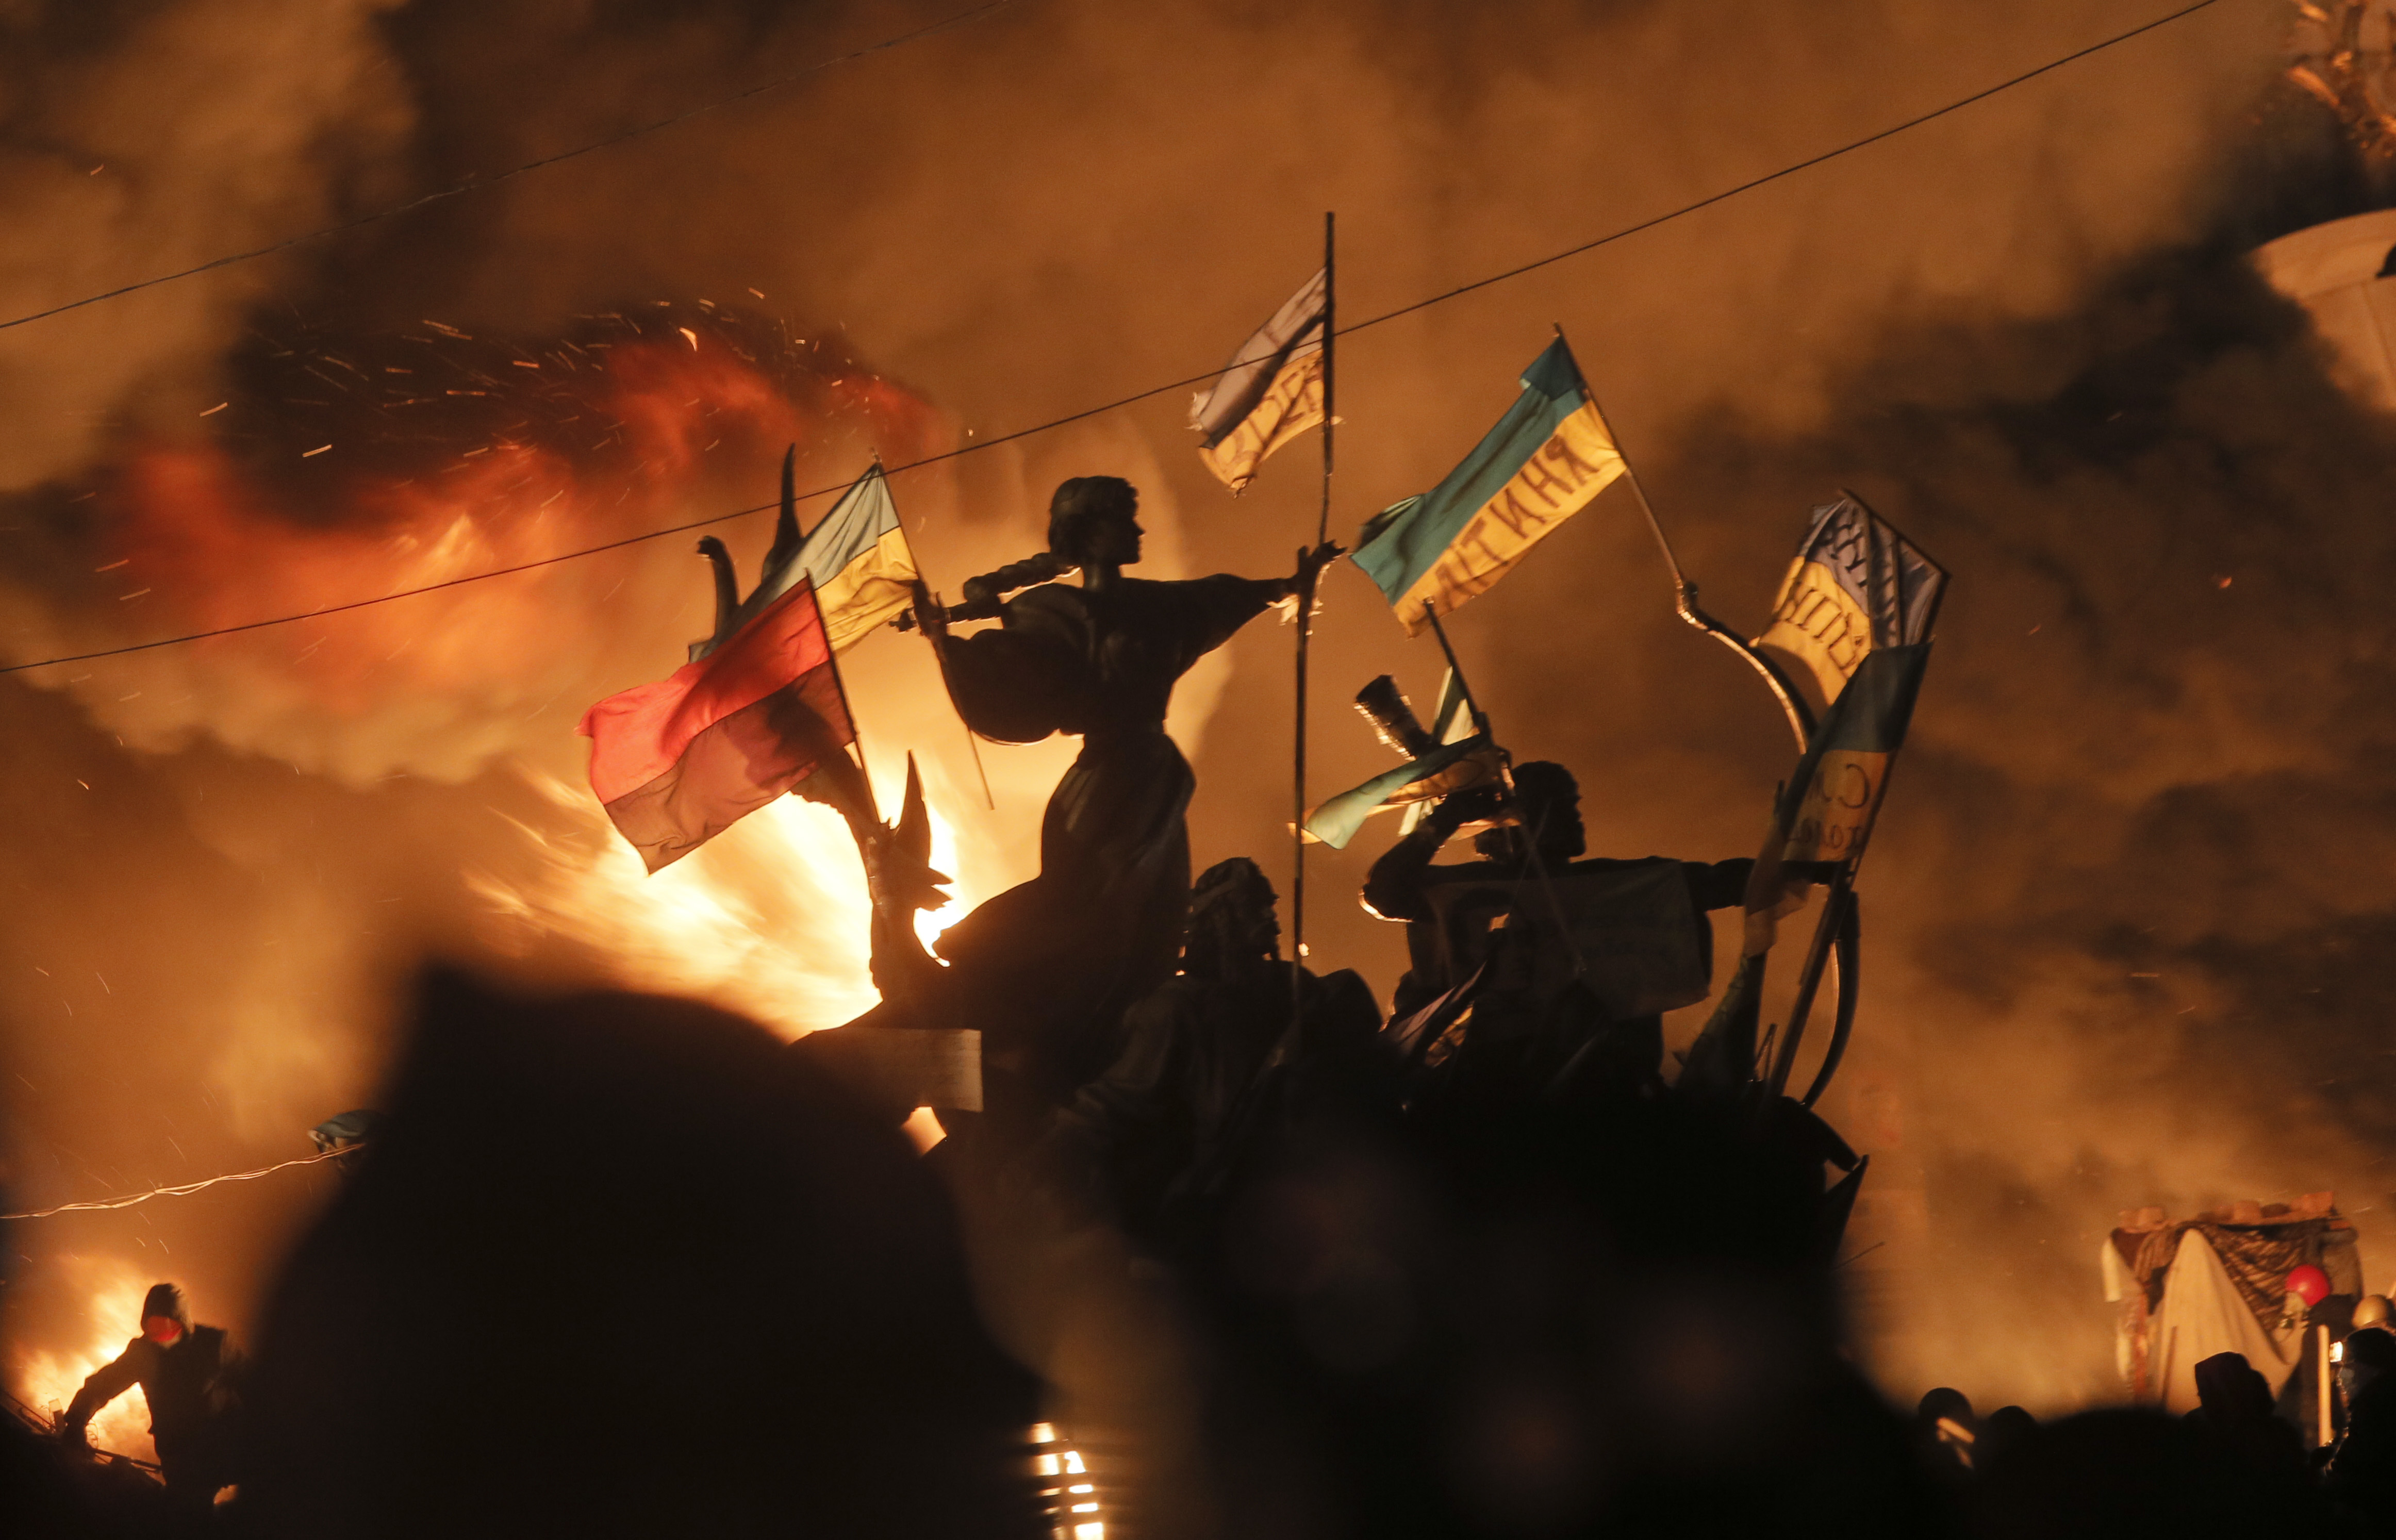 Monuments to Kiev's founders burn as anti-government protesters clash with riot police in Kiev's Independence Square in 2014